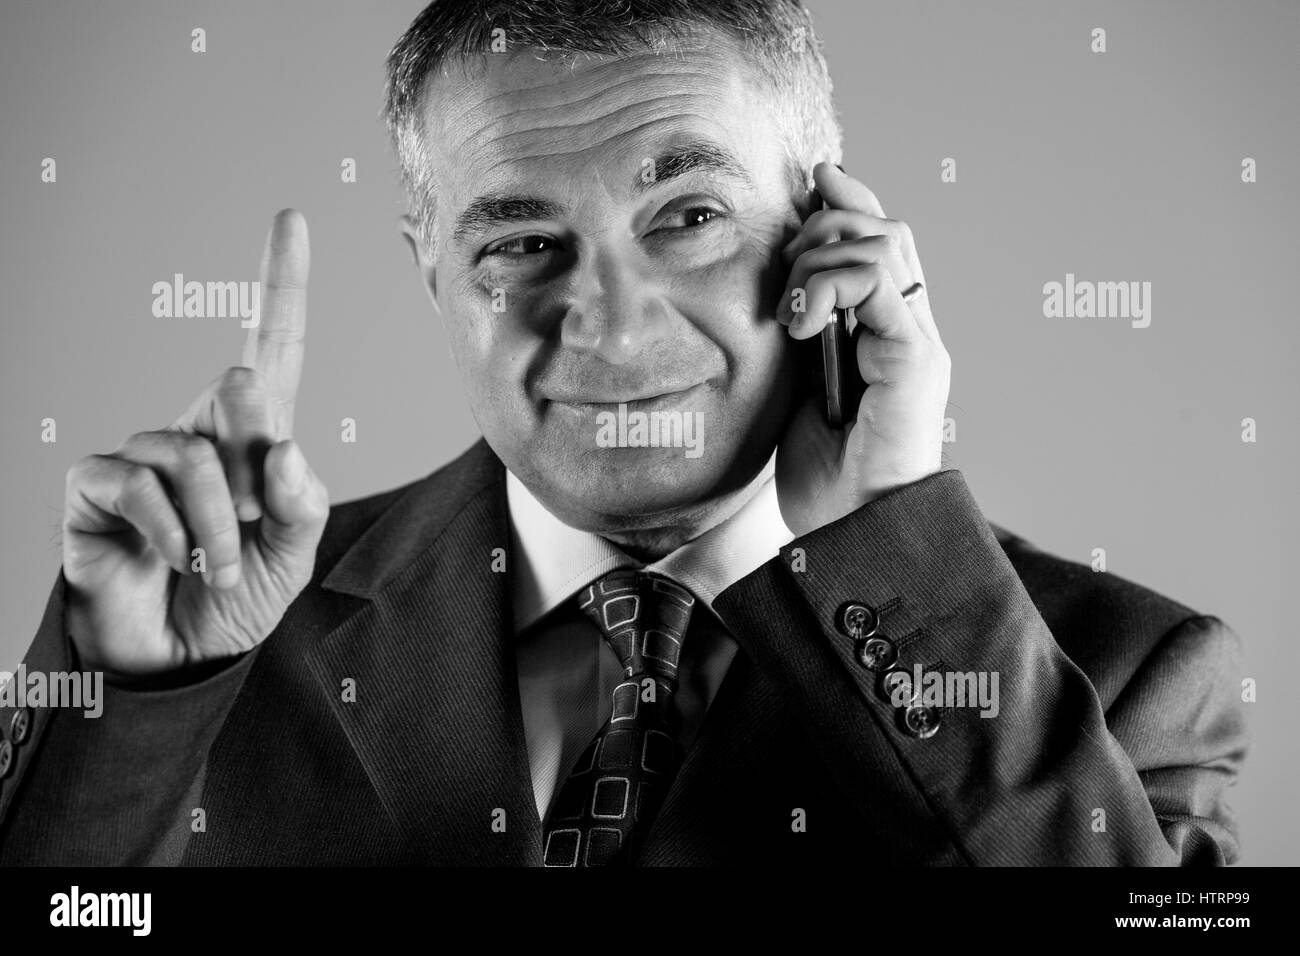 Businessman gesturing with his finger as he listens to a conversation on his mobile phone, close up cropped greyscale image Stock Photo